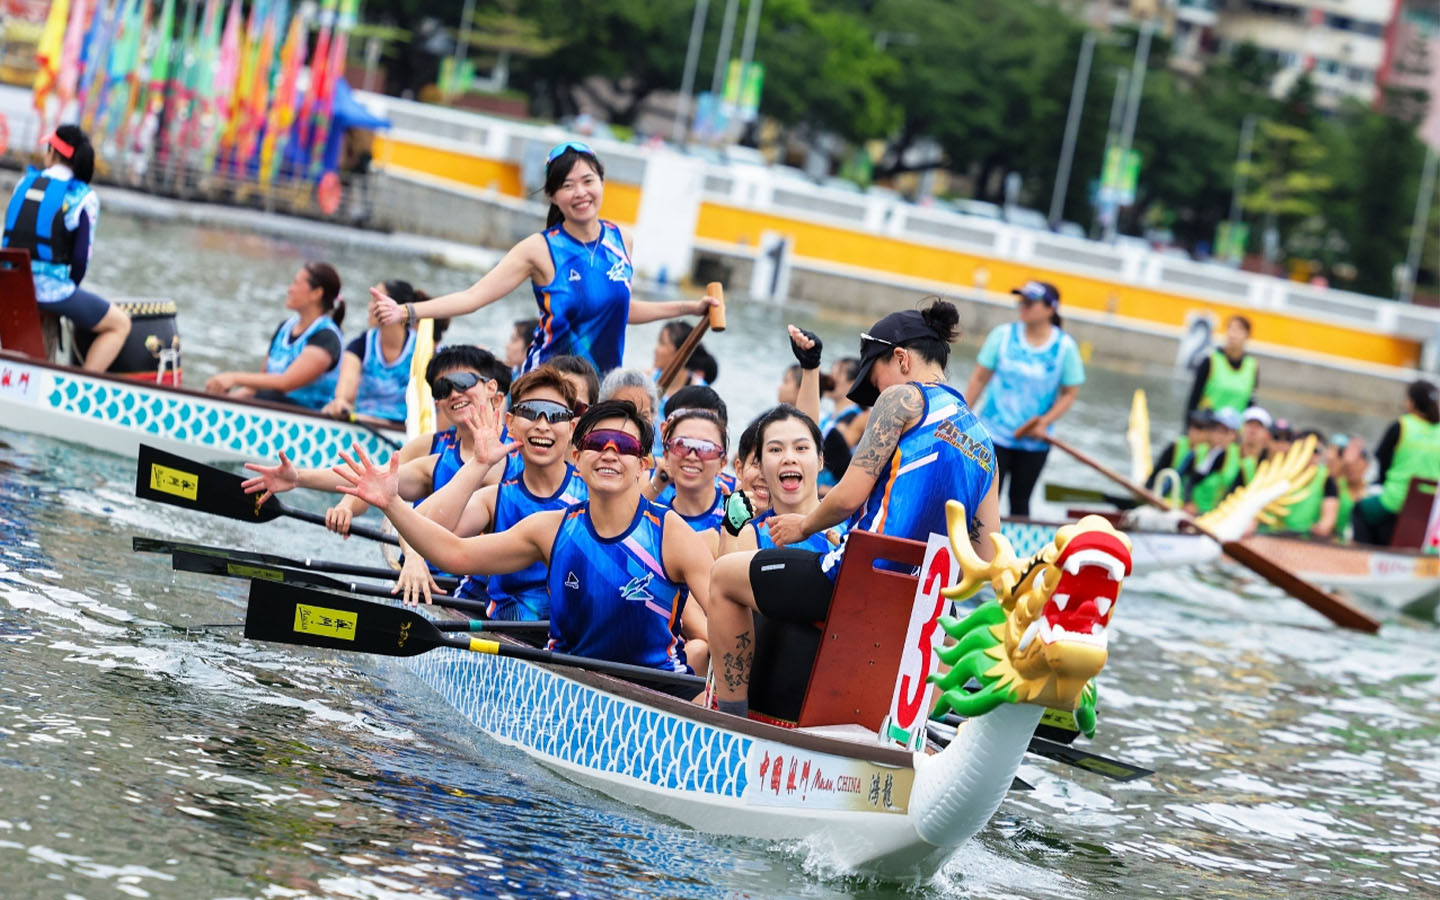 The International Dragon Boat Races are starting from tomorrow